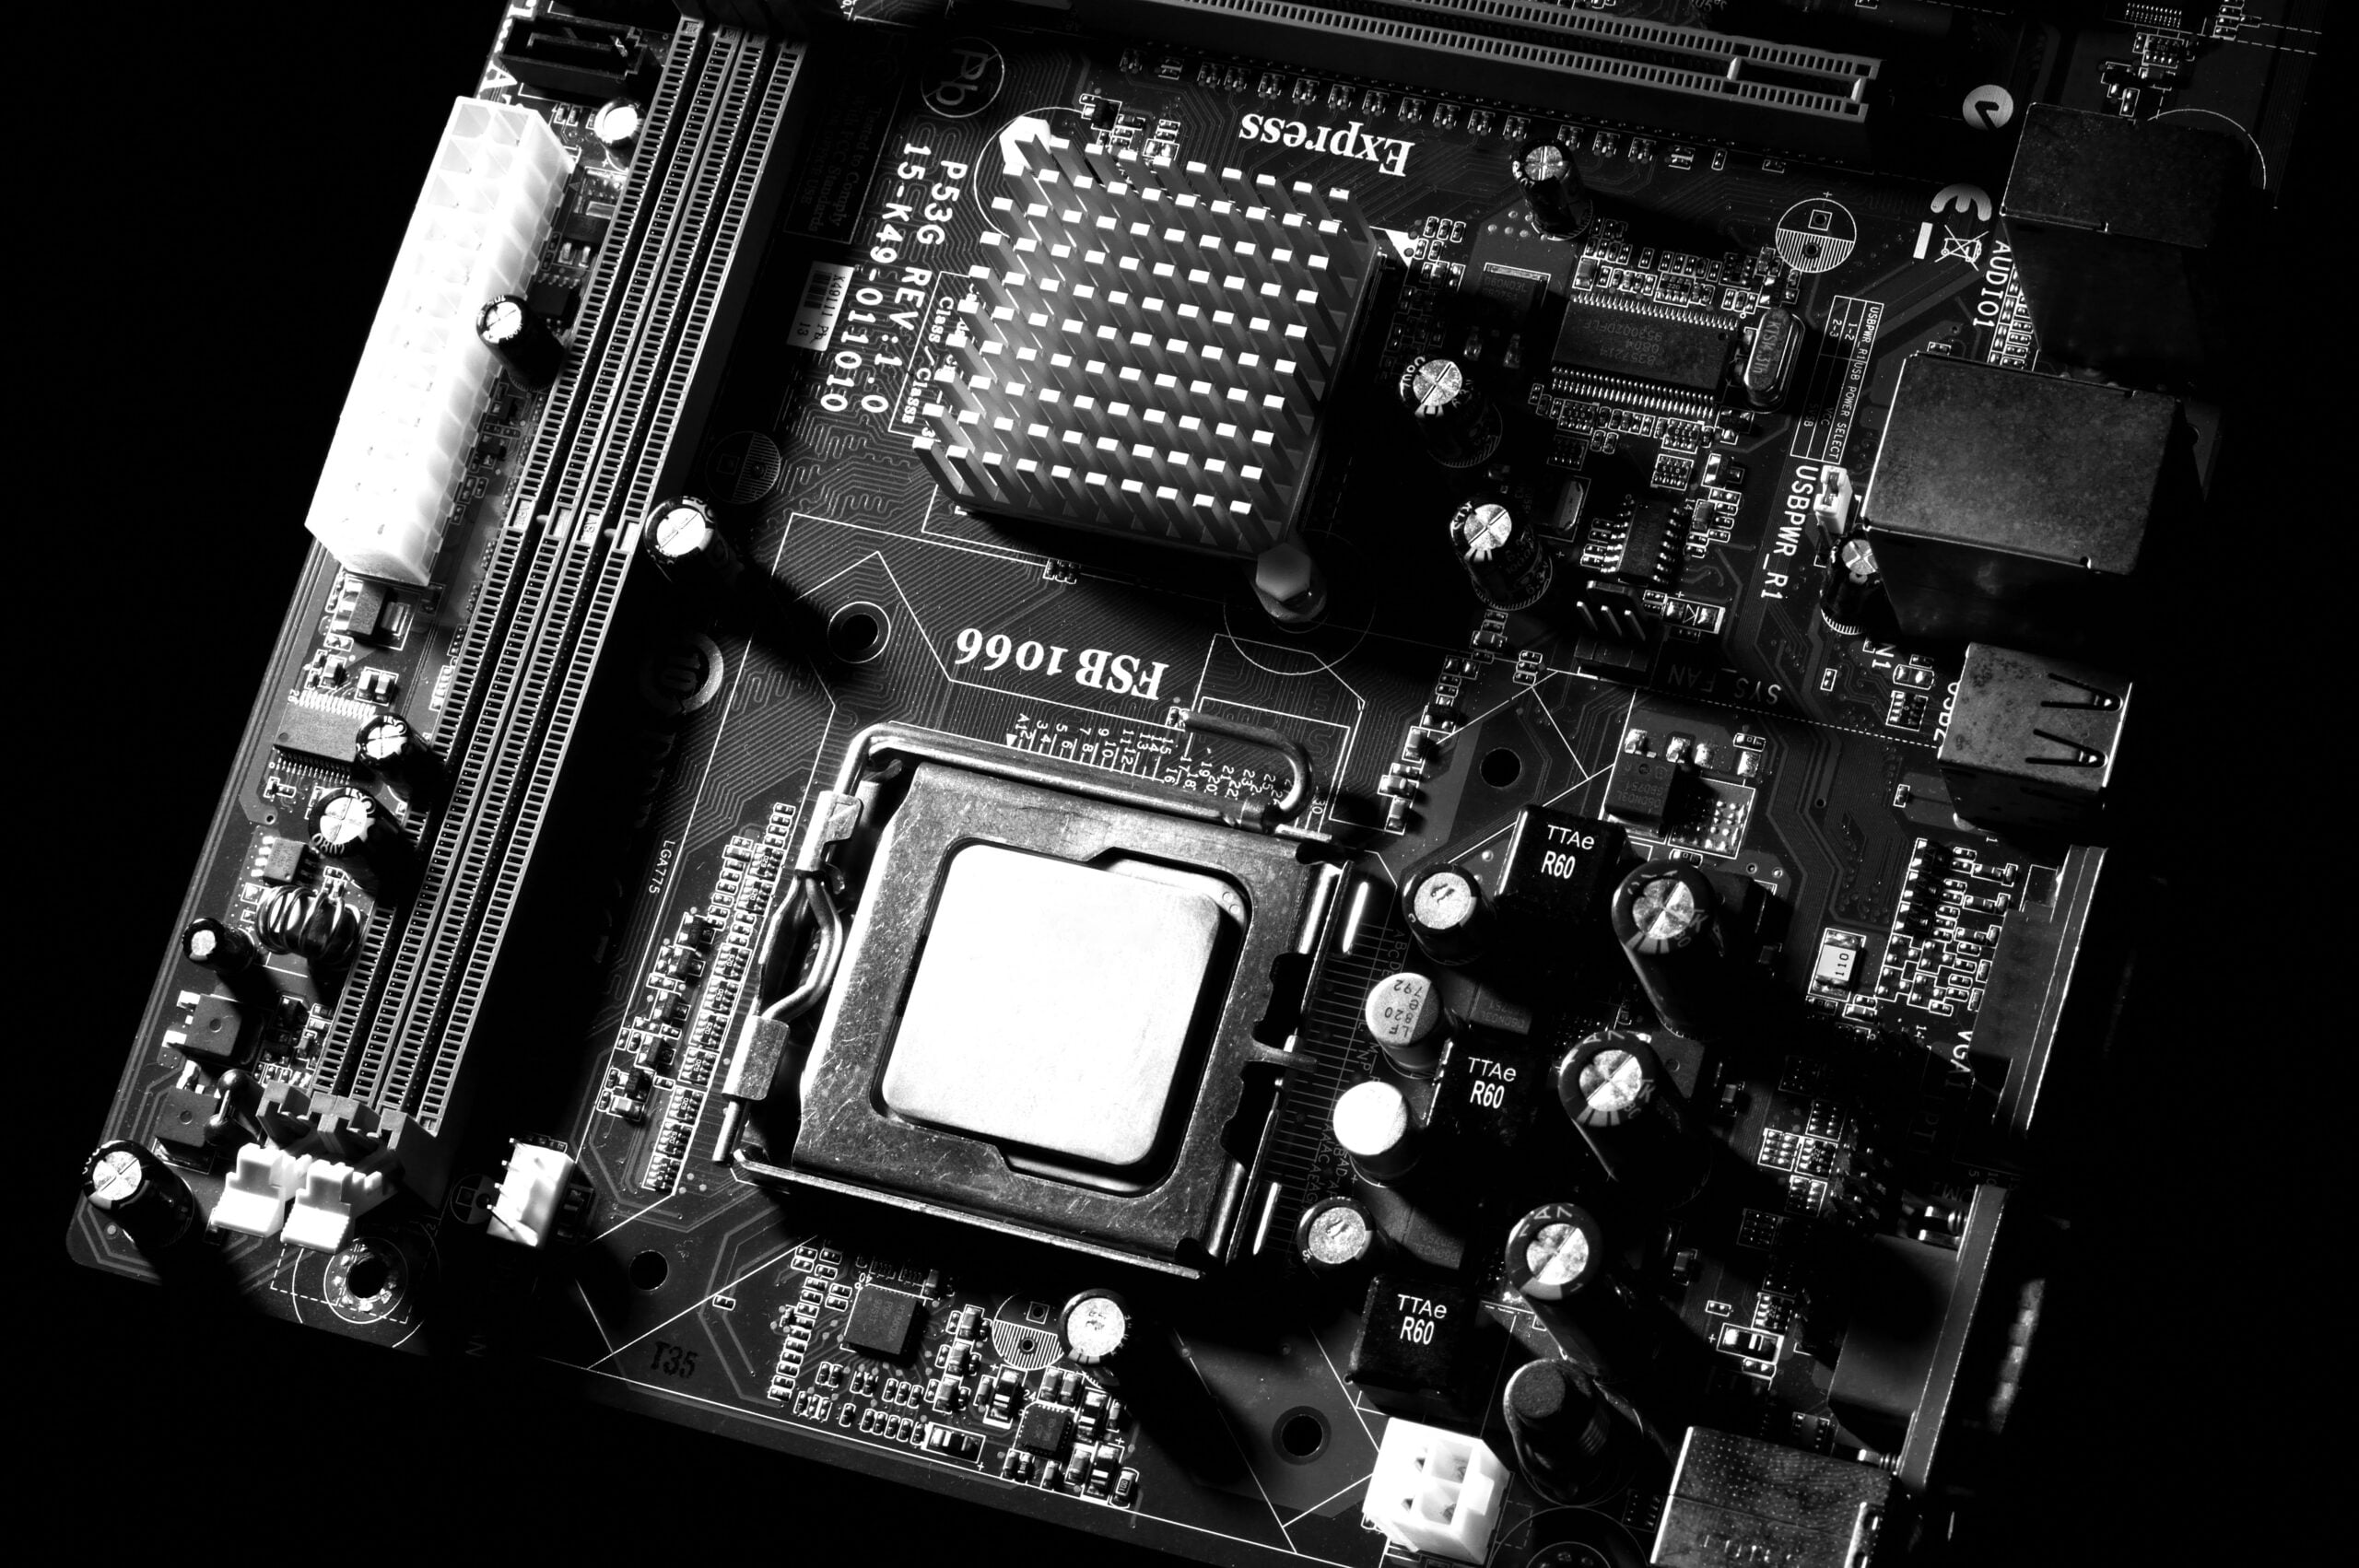 Grayscale photo of motherboard